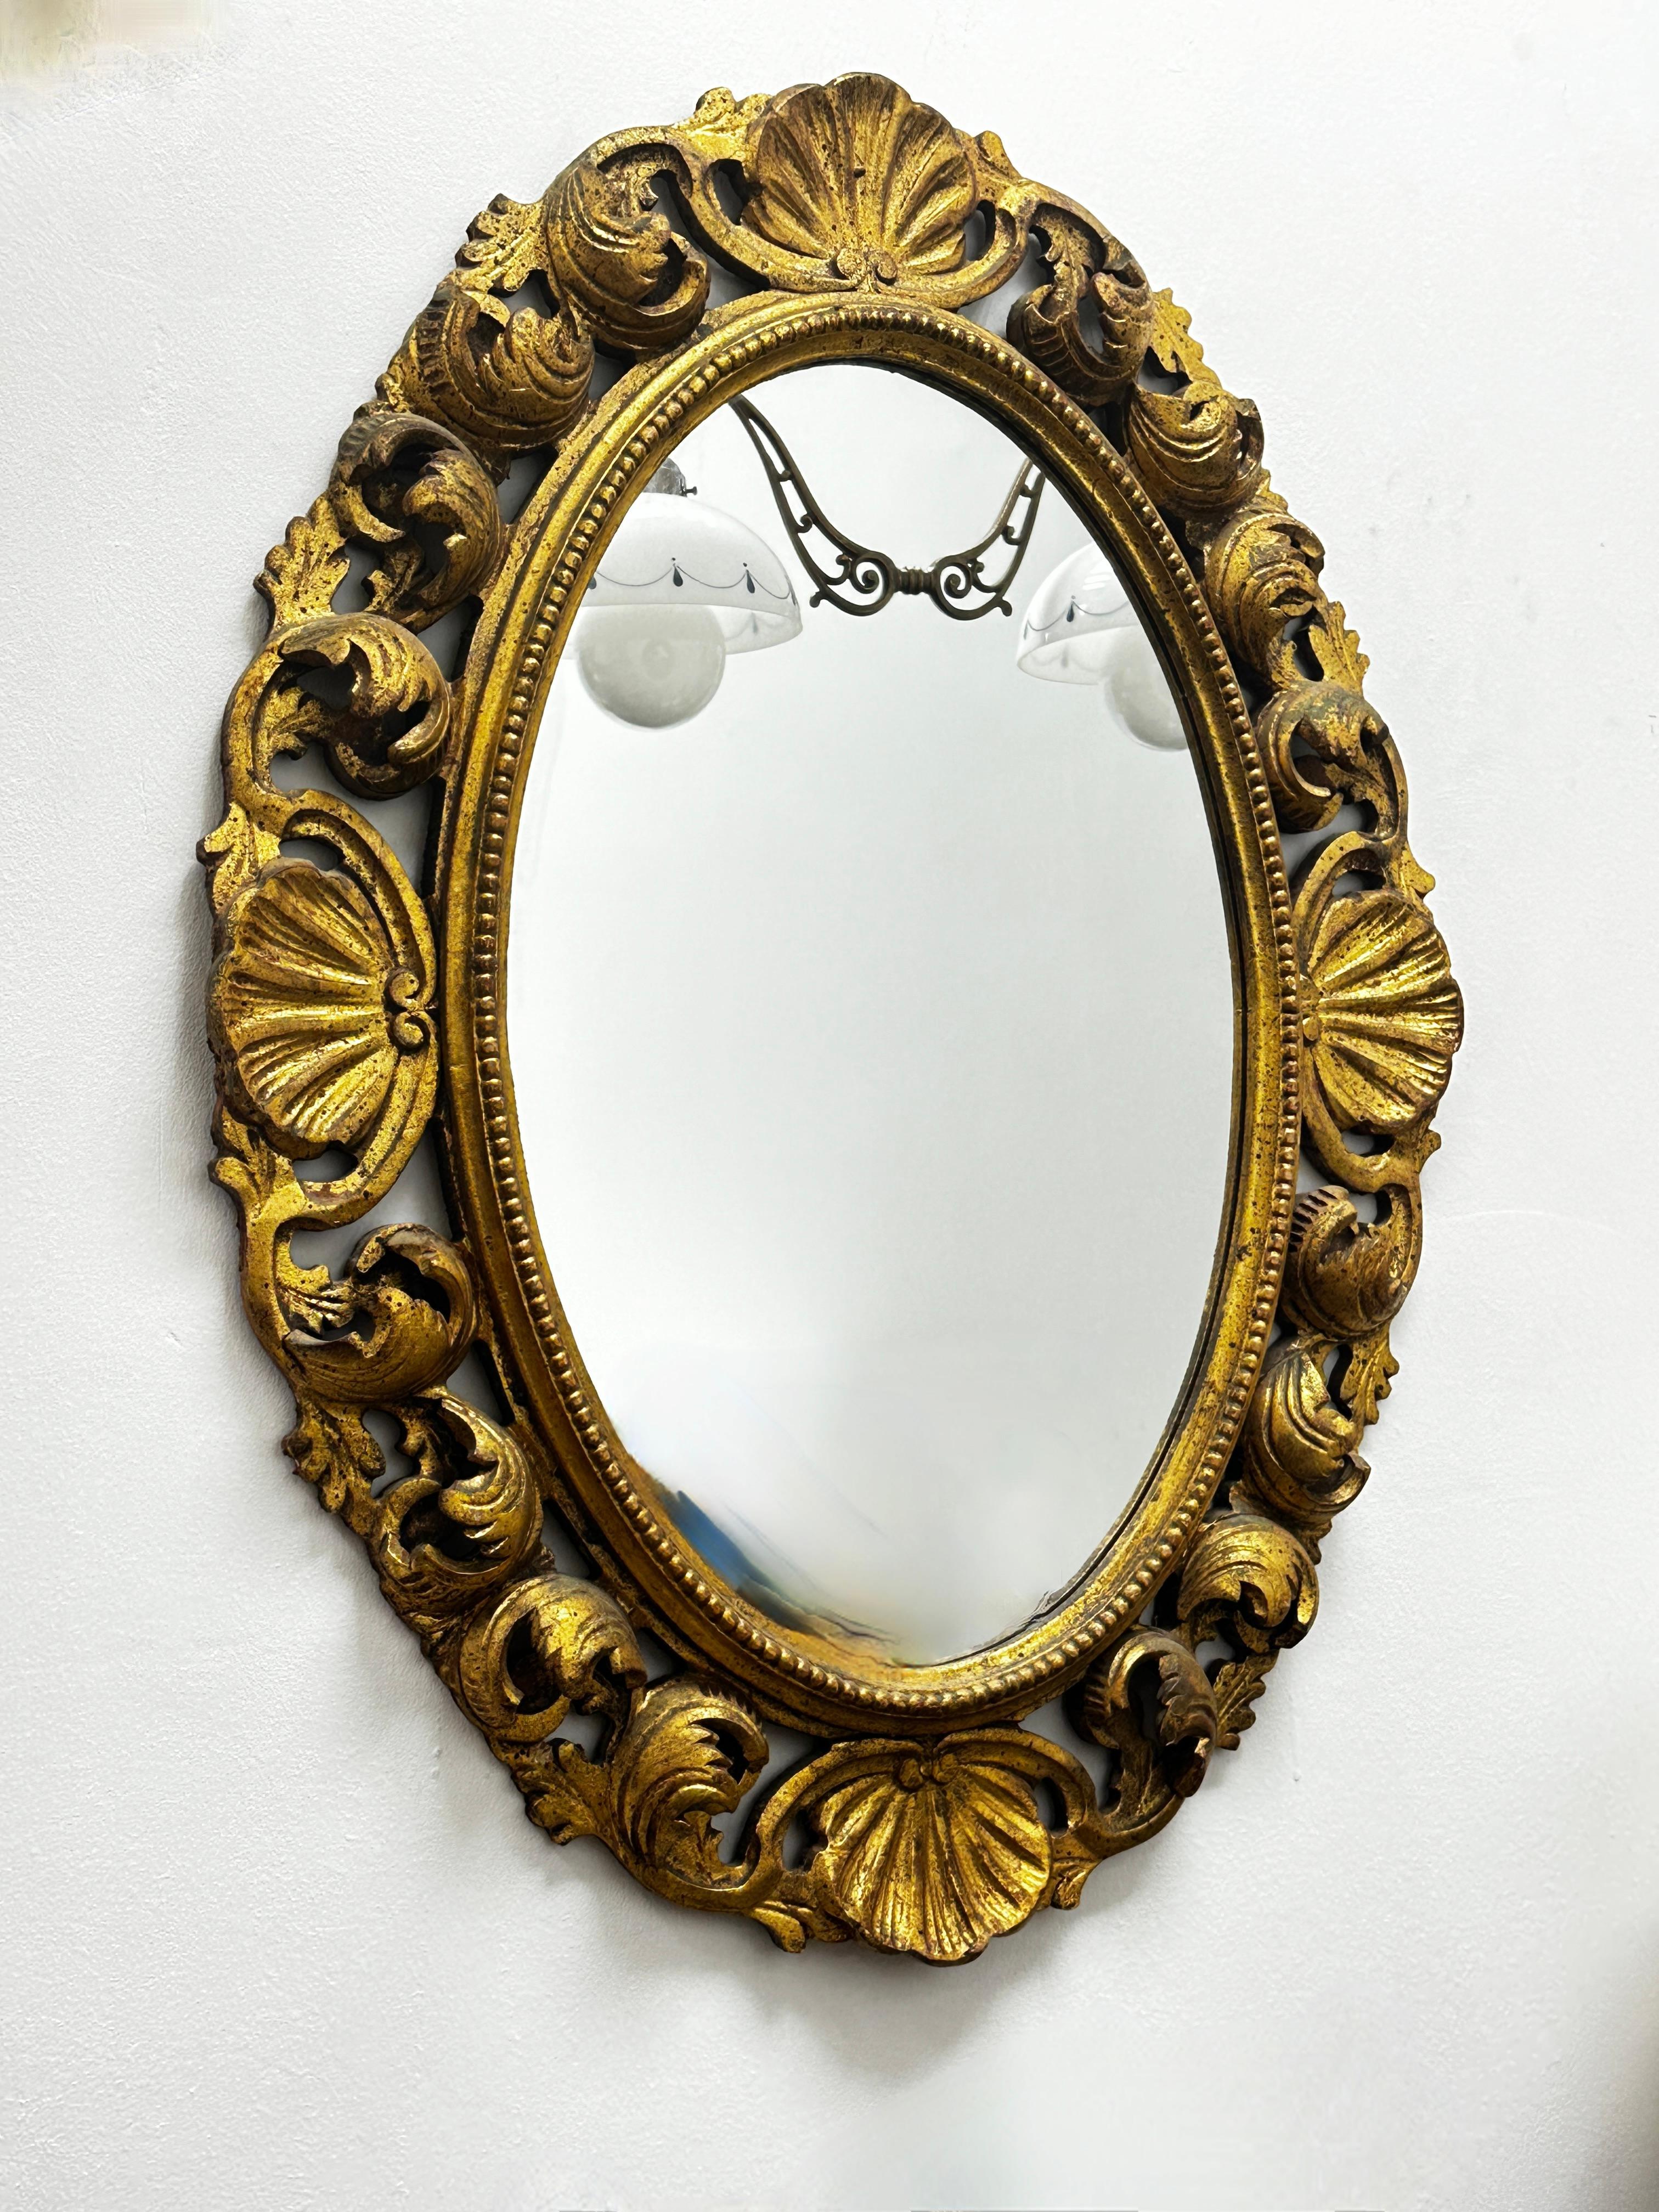 Stunning Hollywood Regency style toleware mirror. The gilt hand carved wooden frame surrounds a glass mirror. Viewable part of the Mirror itself measures approx. 21.5 inches high and 14.13 inches wide. Made in France, in the 1930s or older.